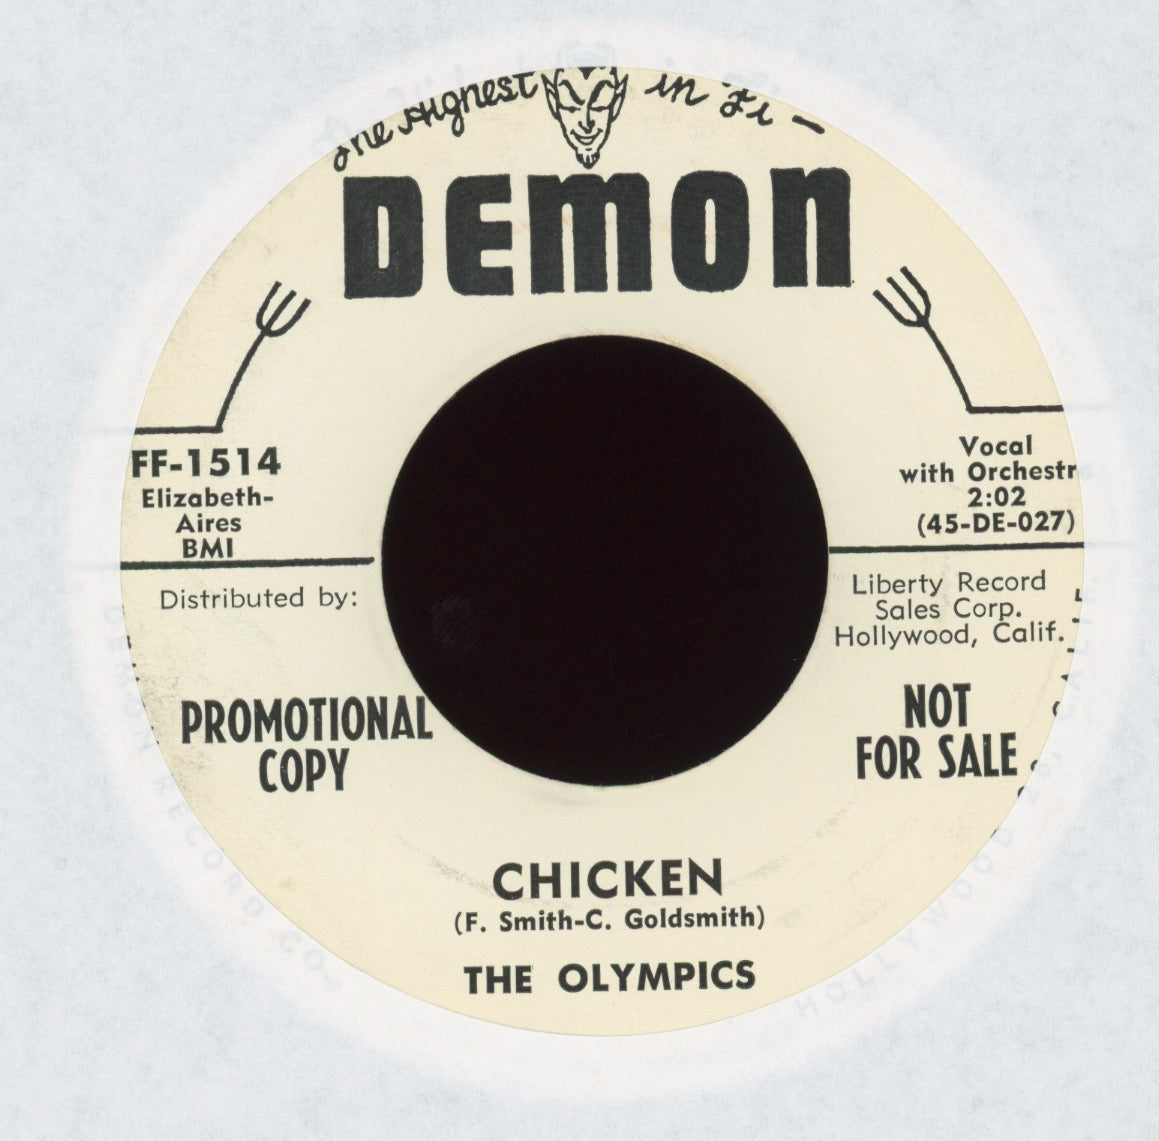 The Olympics - Your Love on Demon Promo